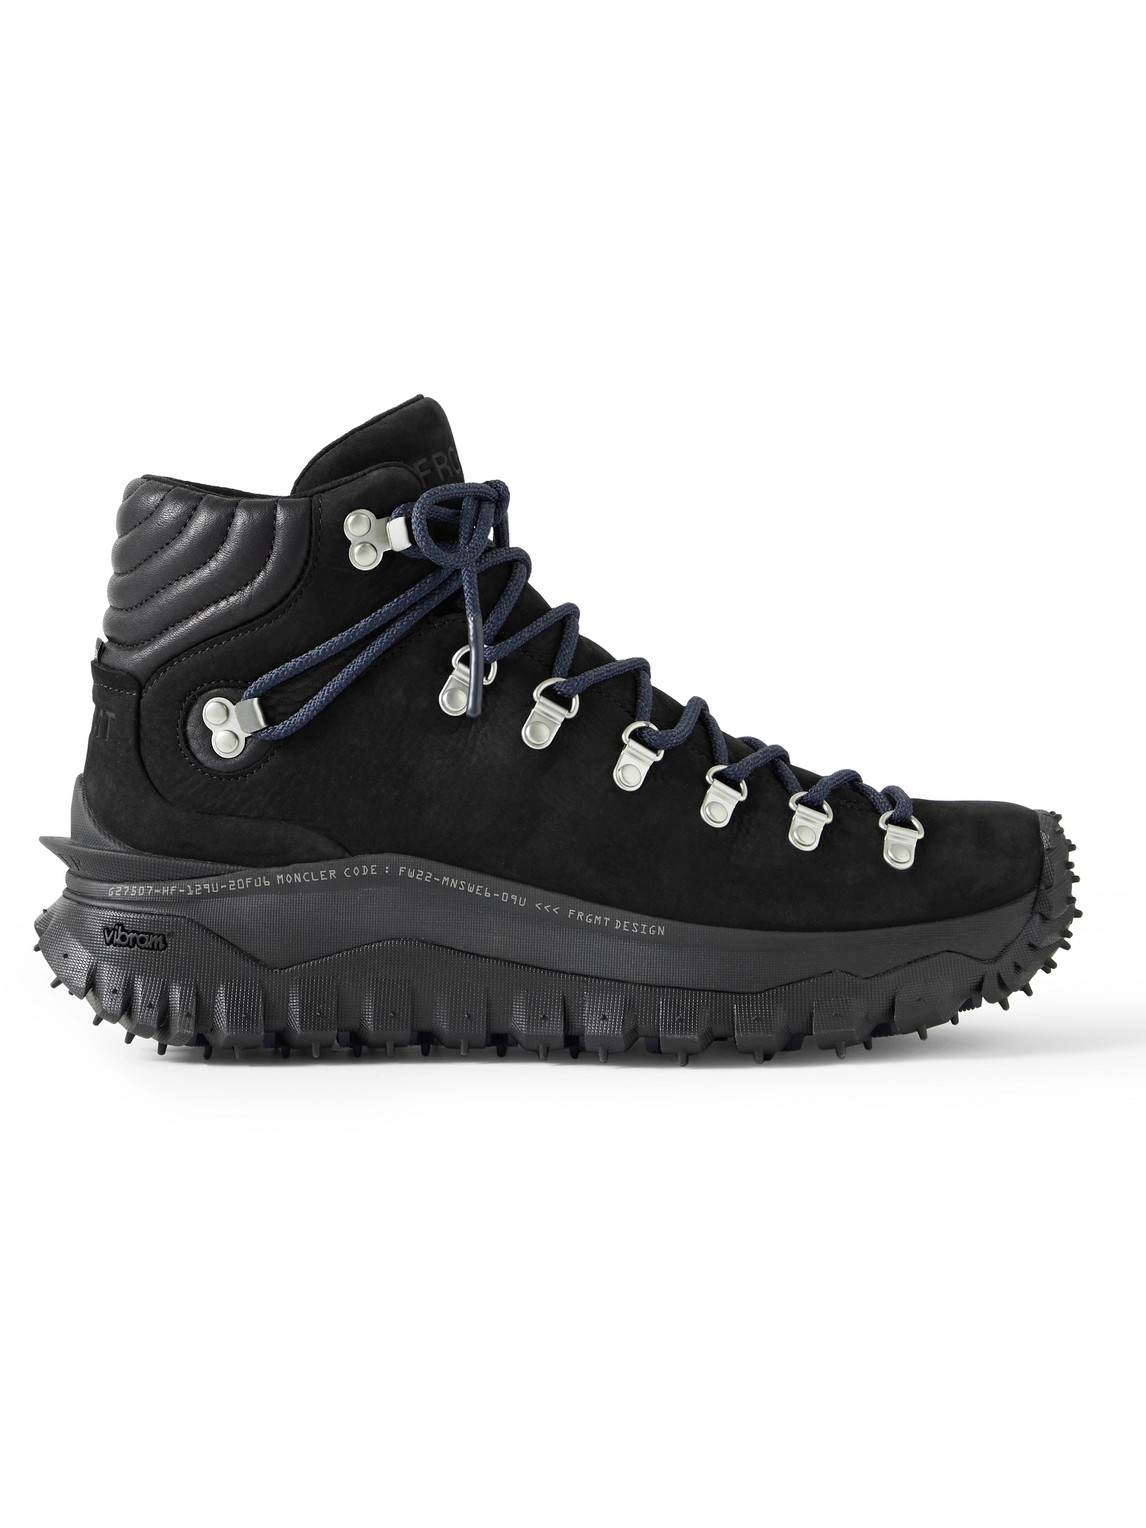 Moncler Genius Fragment Trailgrip GORE-TEX™ Leather-Trimmed Nubuck Hiking Sneakers